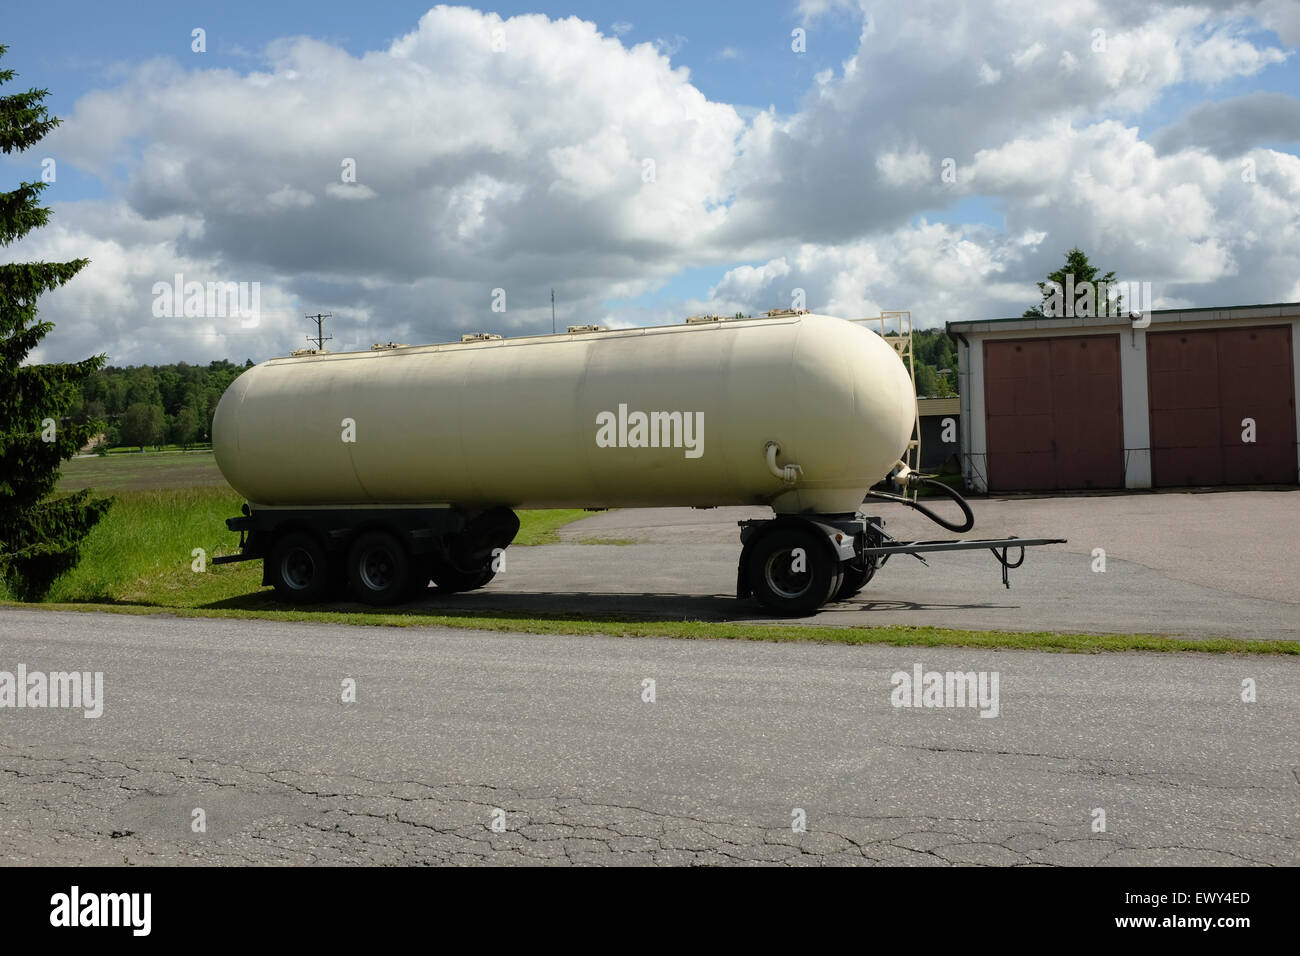 tank car parked in the summer, horizontal Stock Photo